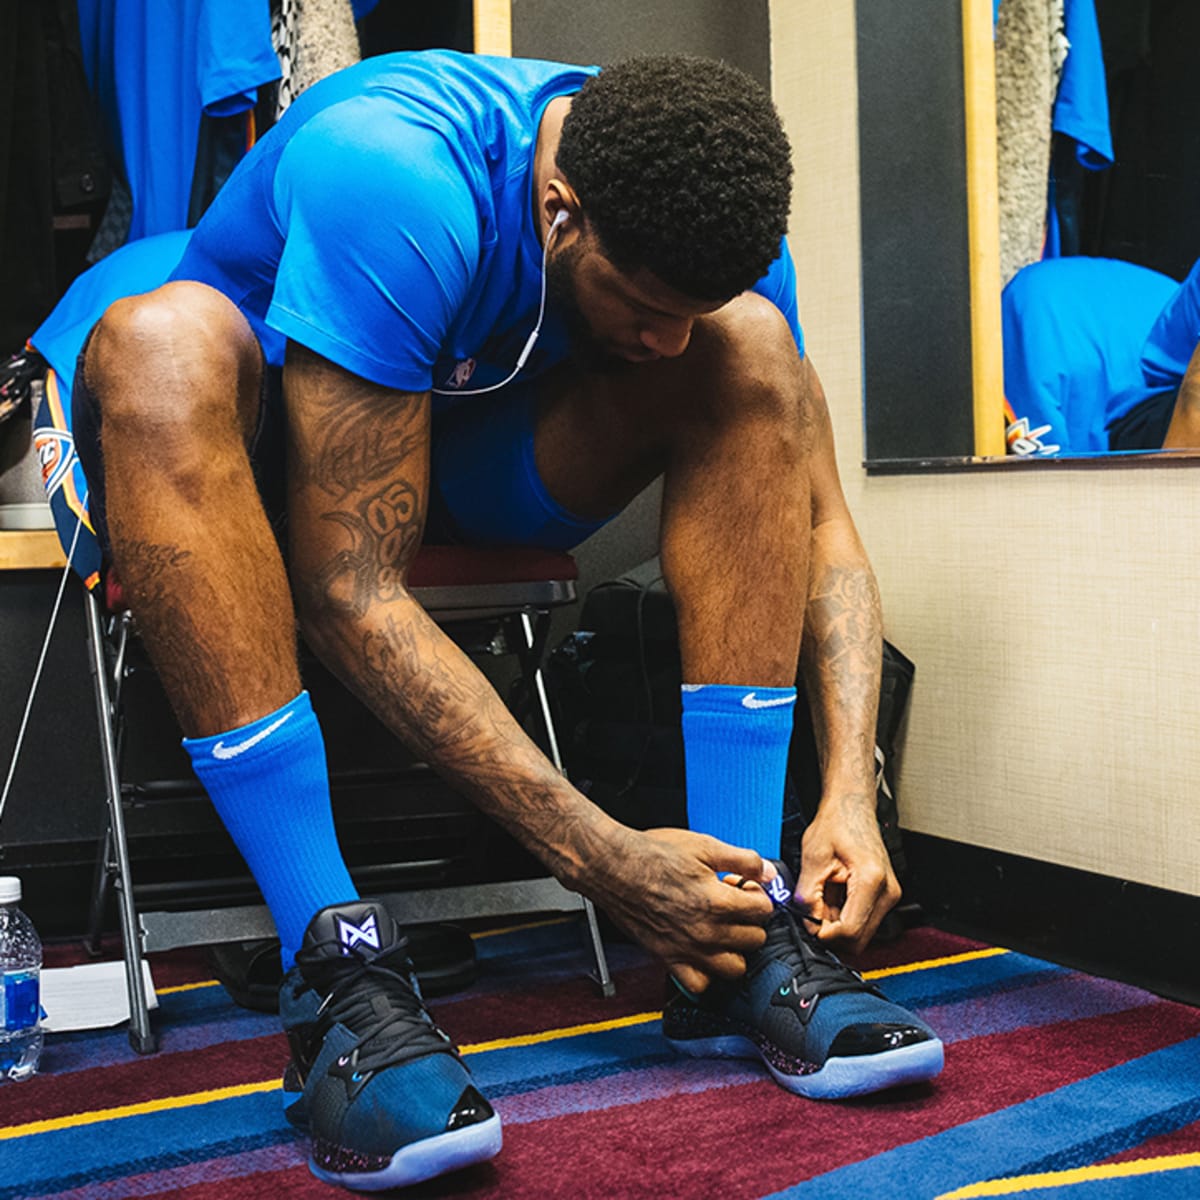 Is Paul George's Nike Sneaker Line Over? - Sports Illustrated FanNation  Kicks News, Analysis and More